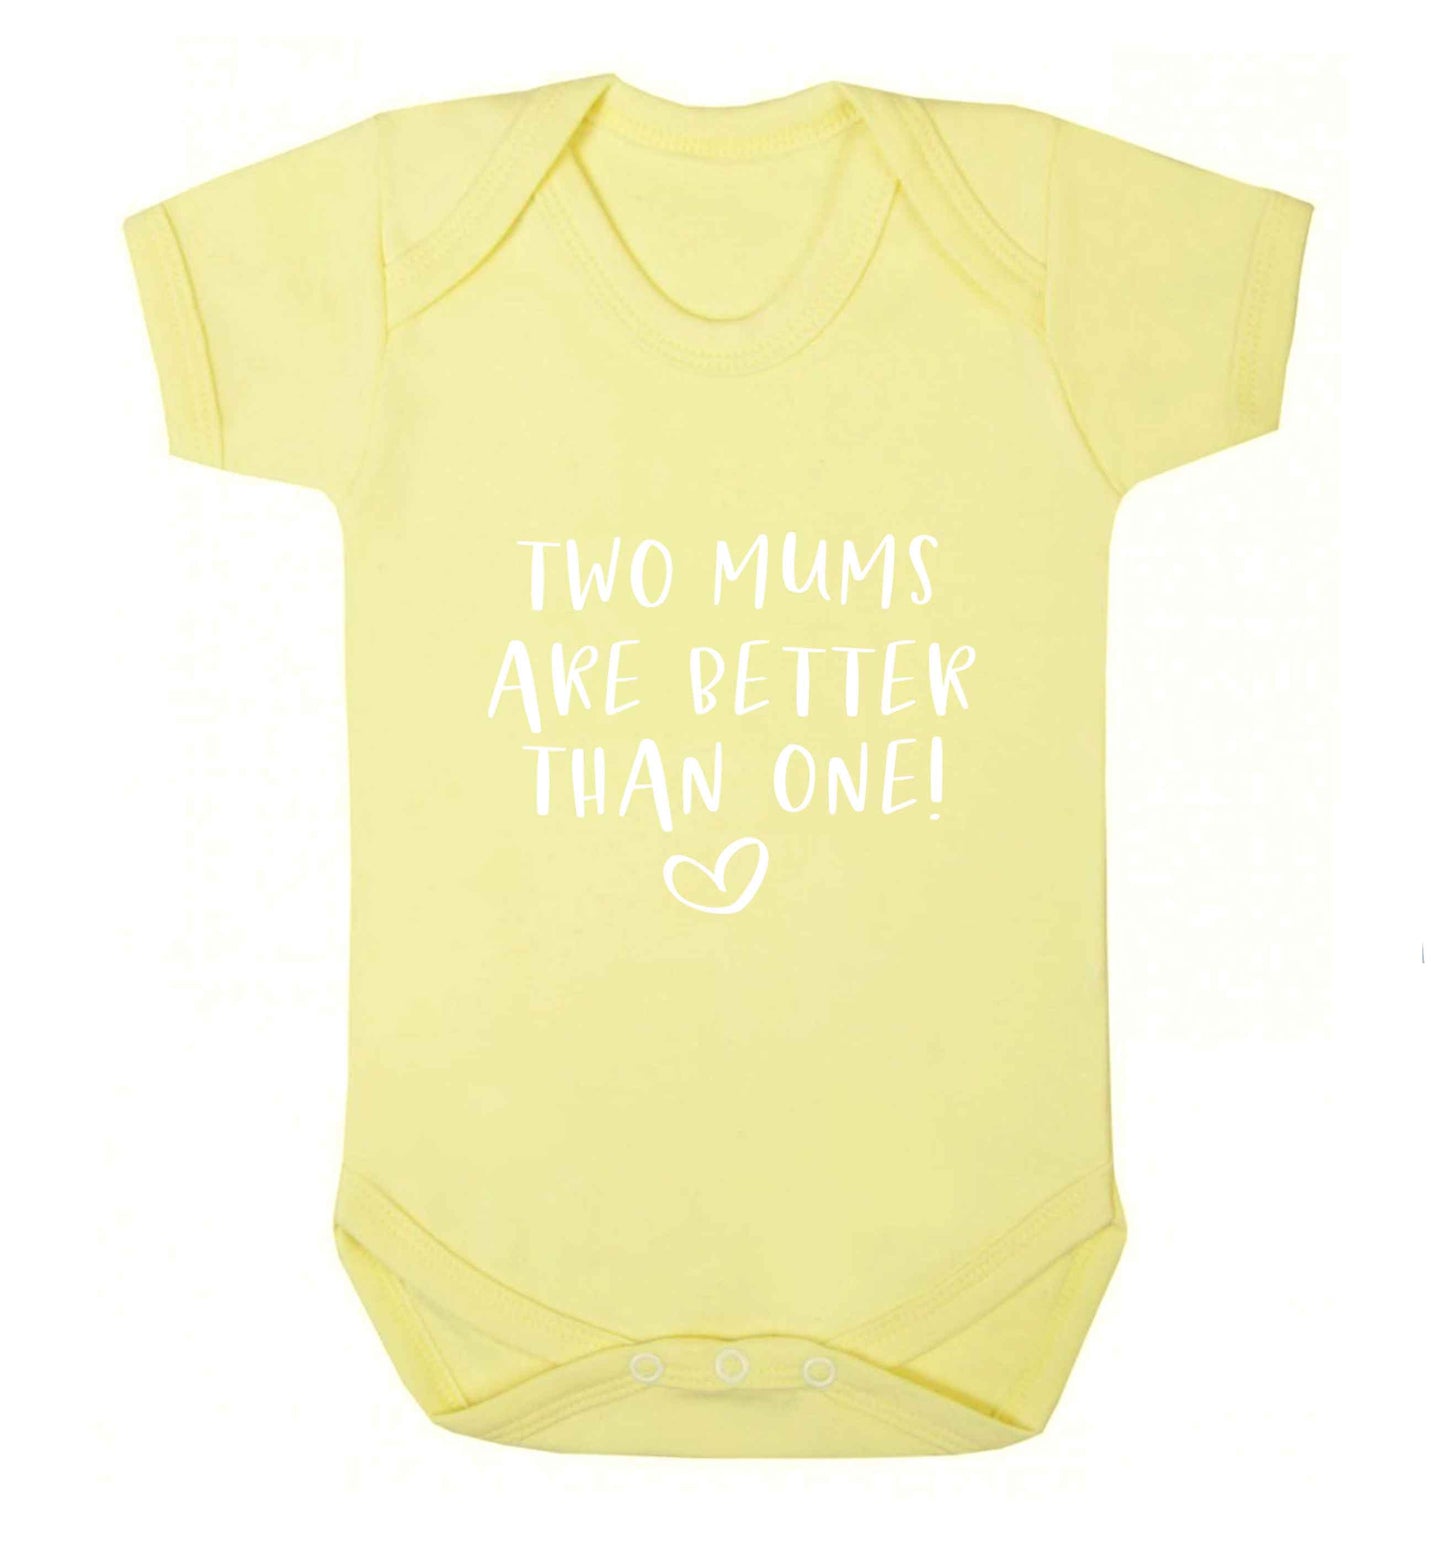 Two mums are better than one baby vest pale yellow 18-24 months